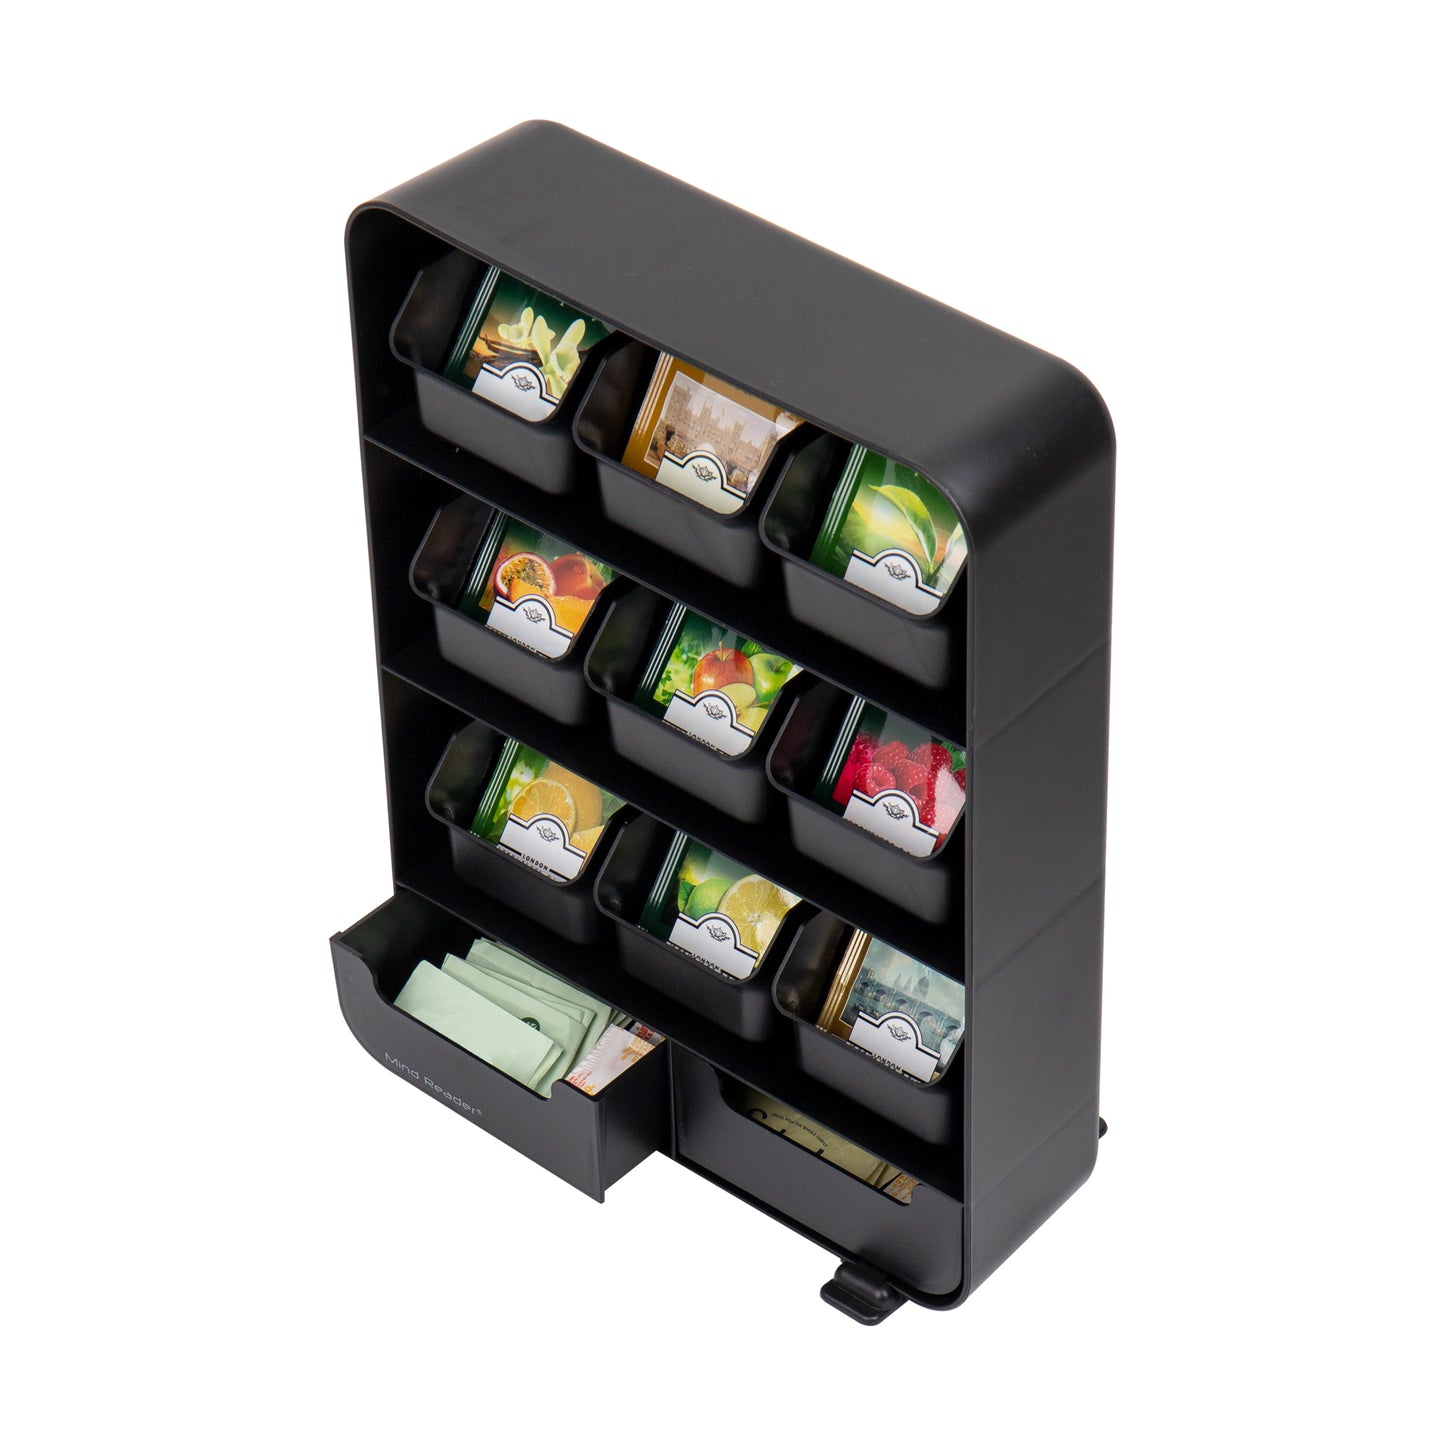 Mind Reader Anchor Collection, Coffee and Tea Dispenser Set, Includes a Single Serve 36 Coffee Pod Capacity Drawer, and a 9-Drawer Tea Bag Organizer, Countertop Organizer Set, Set of 2, Black